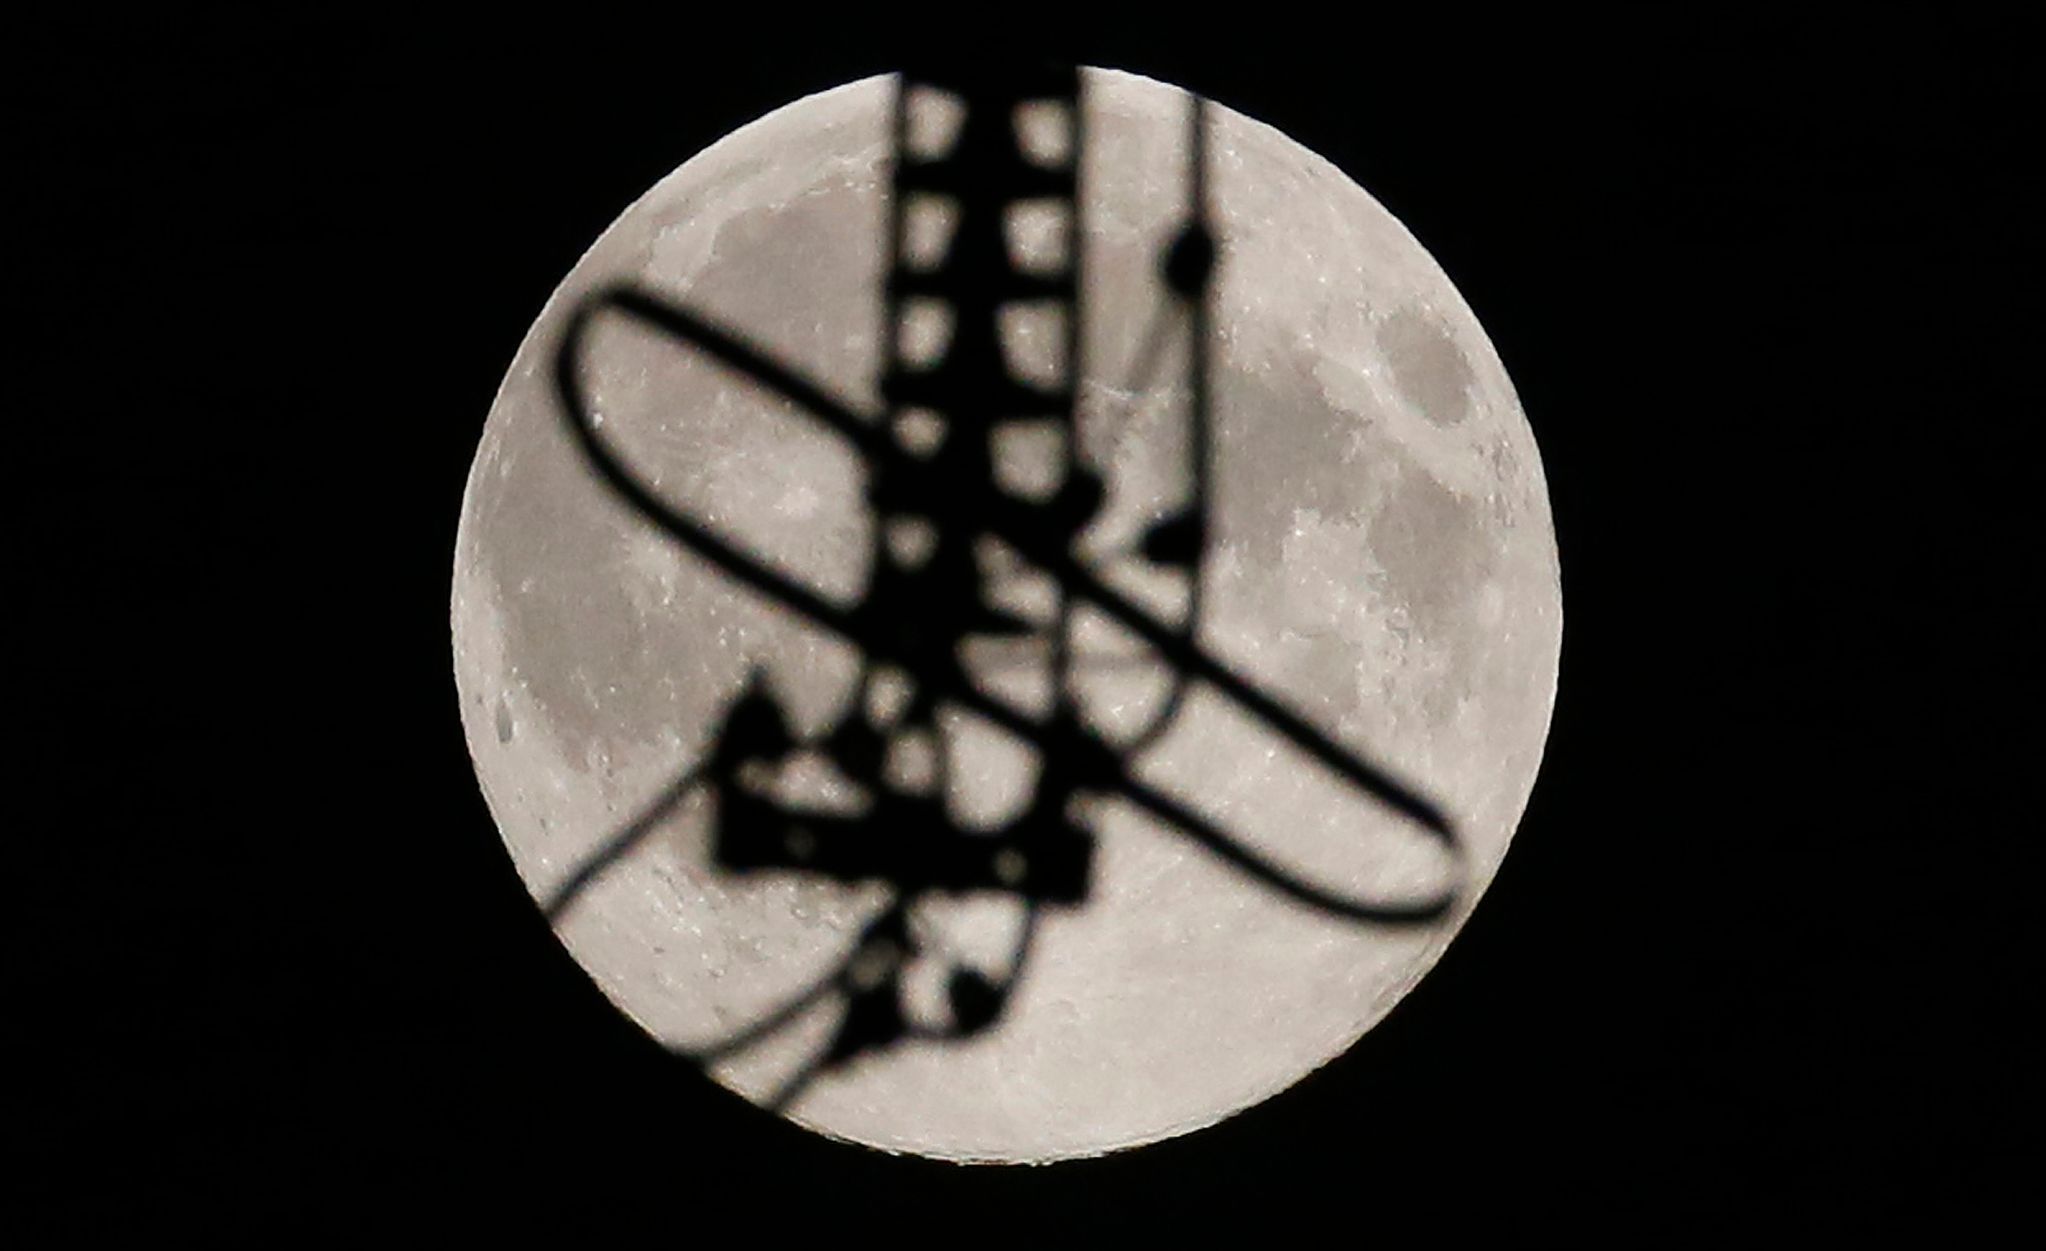 Supermoon is seen through parts of a high-voltage electric line at the Krasnoyarsk hydro electric power station in Russia's Siberian city of Krasnoyarsk